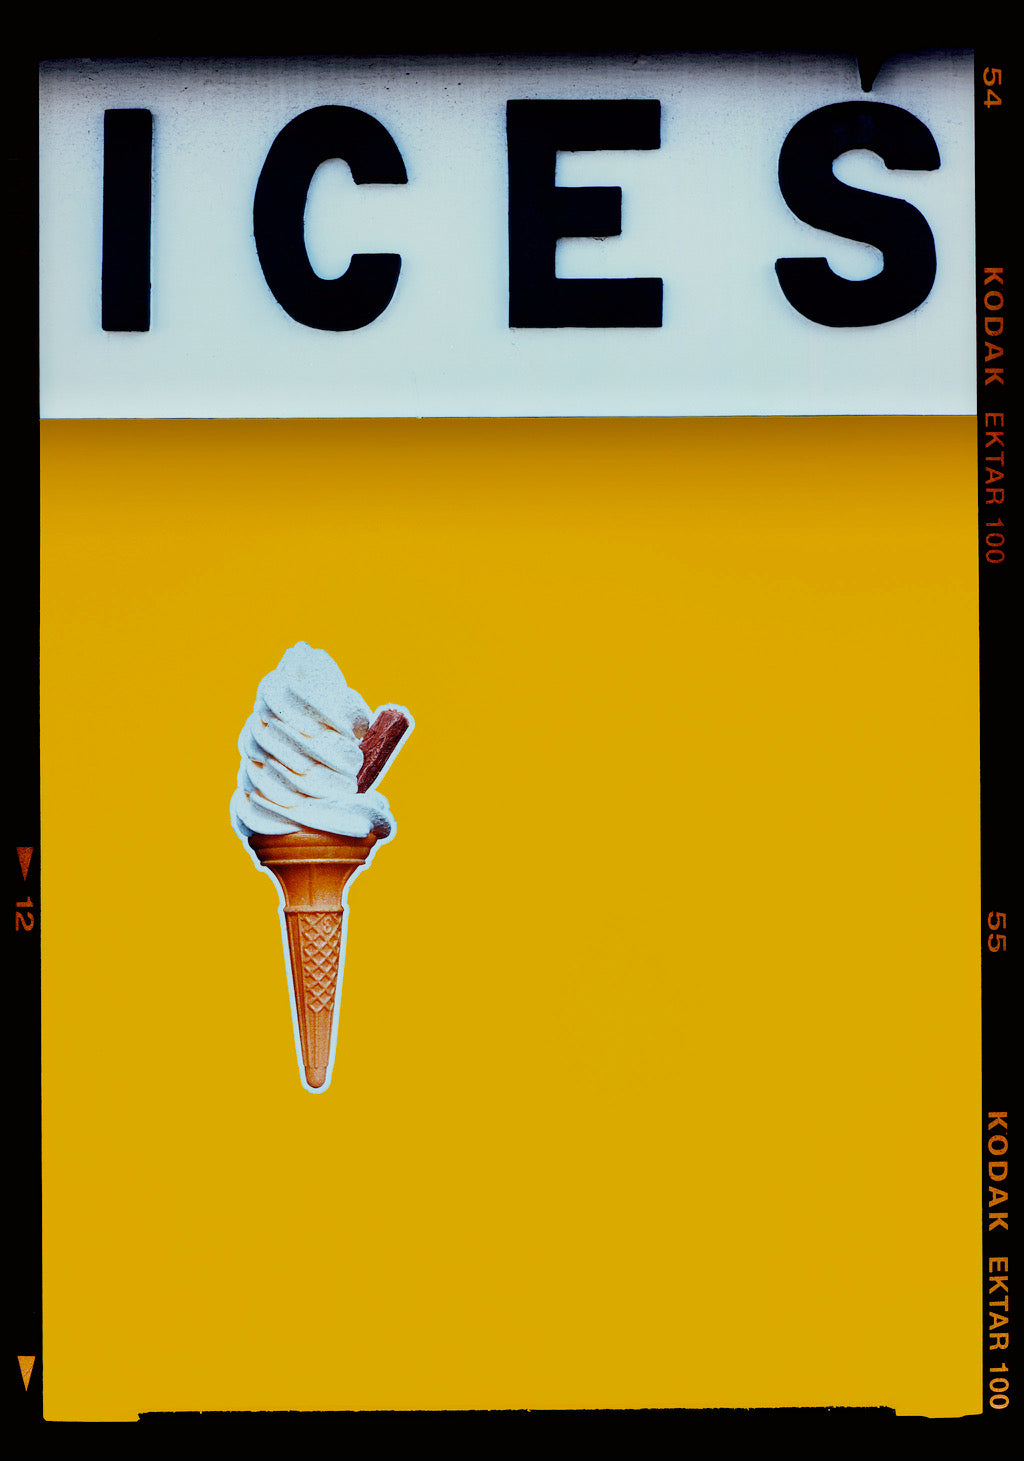 Ices (Mustard) by Richard Heeps